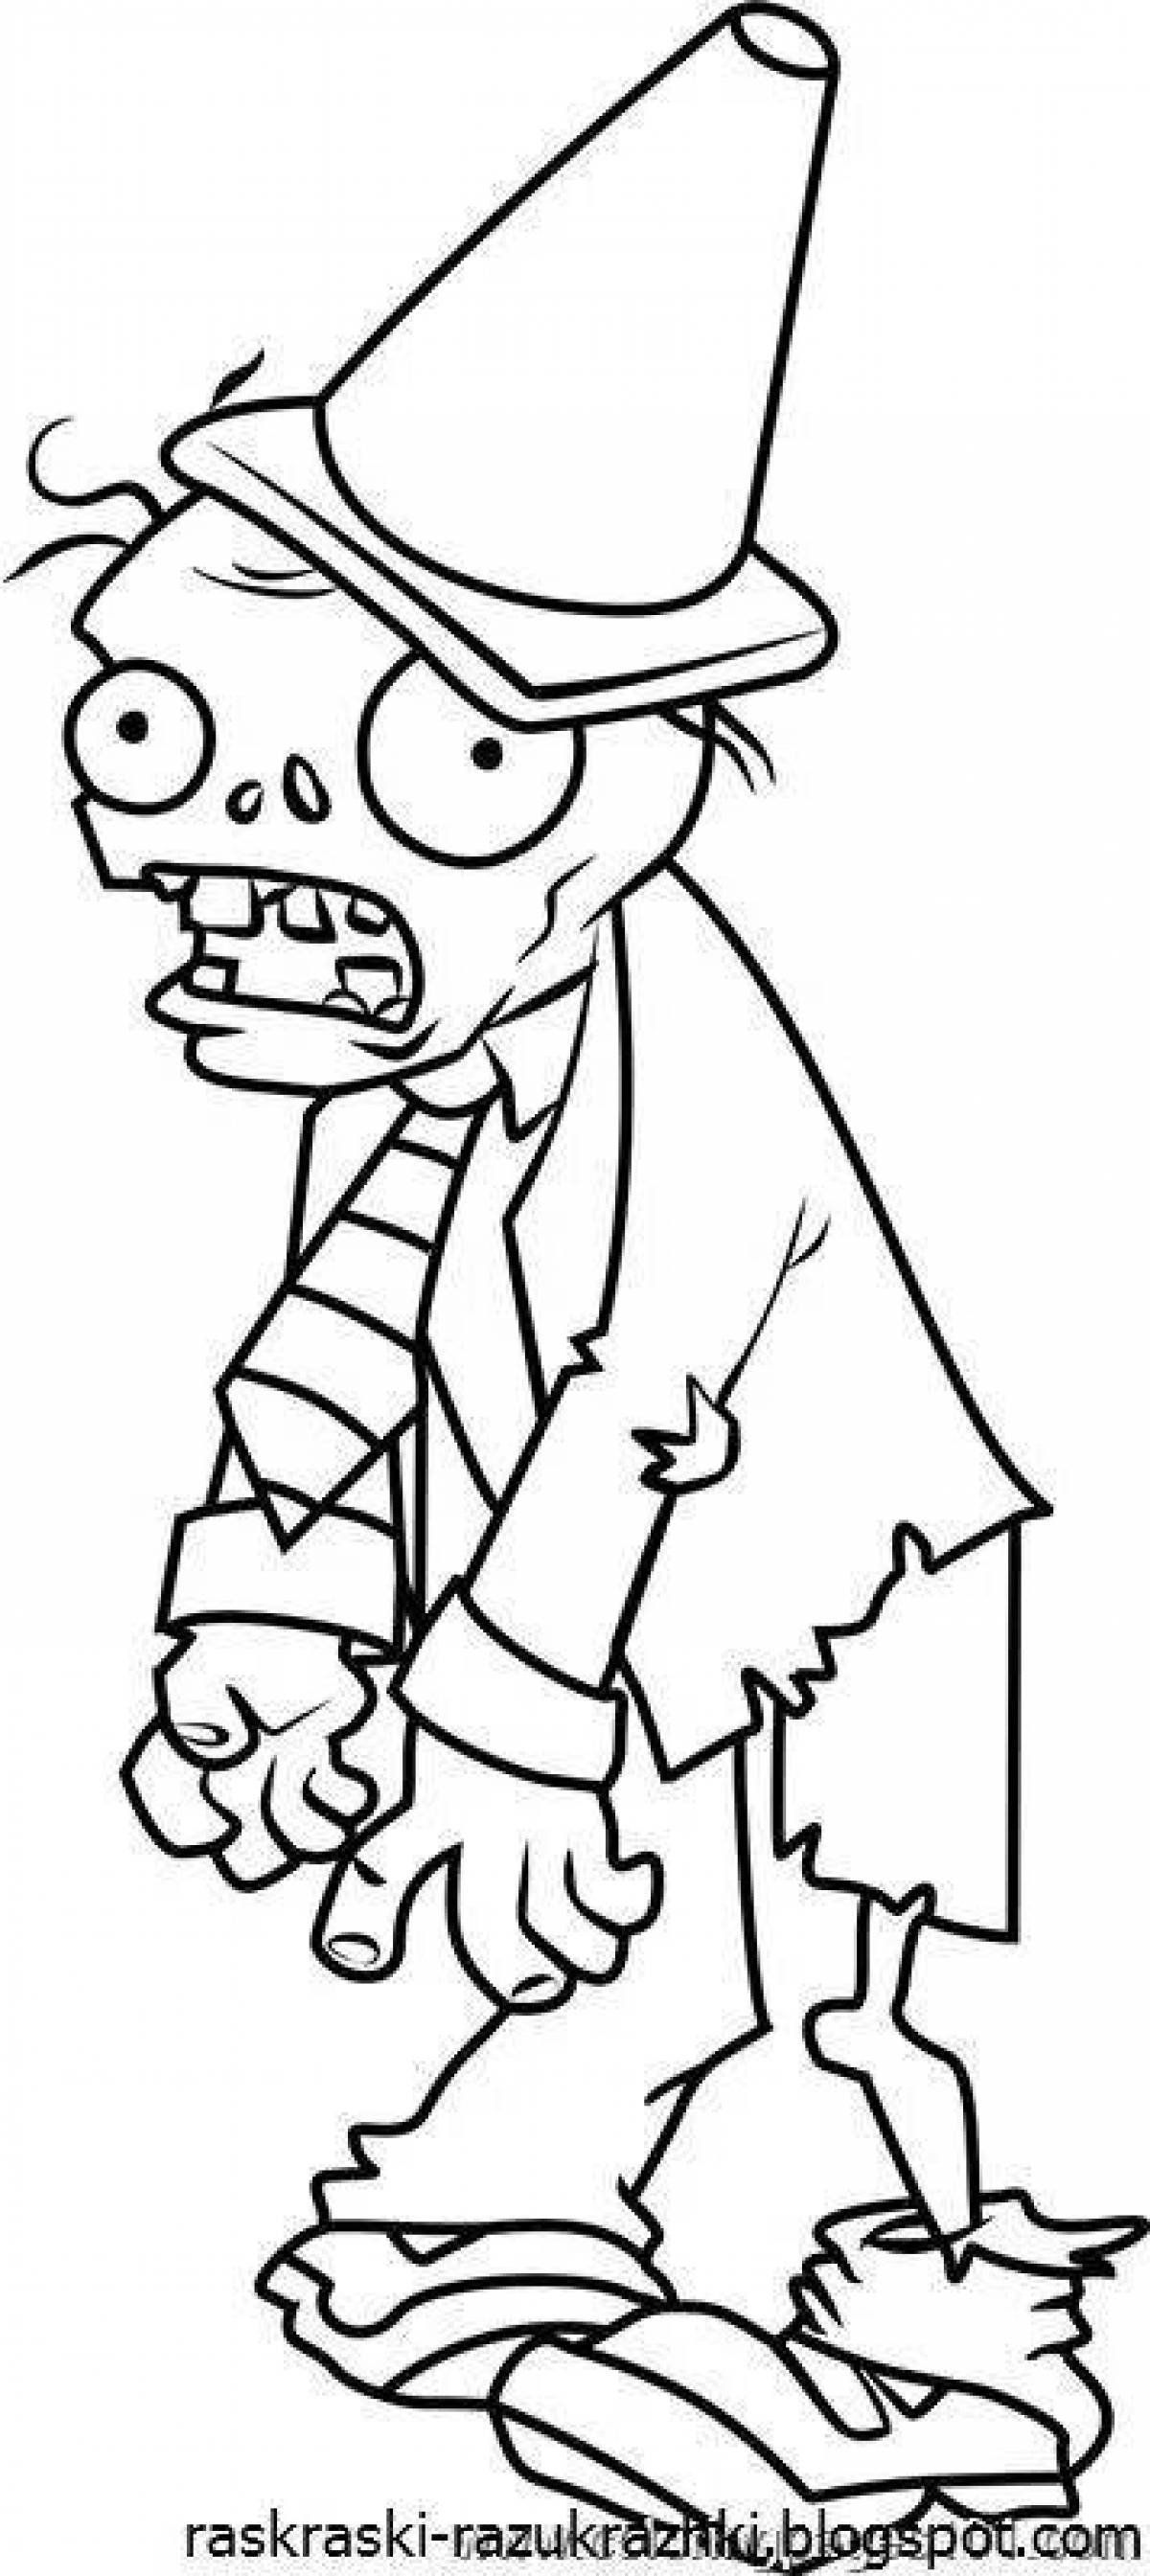 Zombie sketchers unnerving coloring page